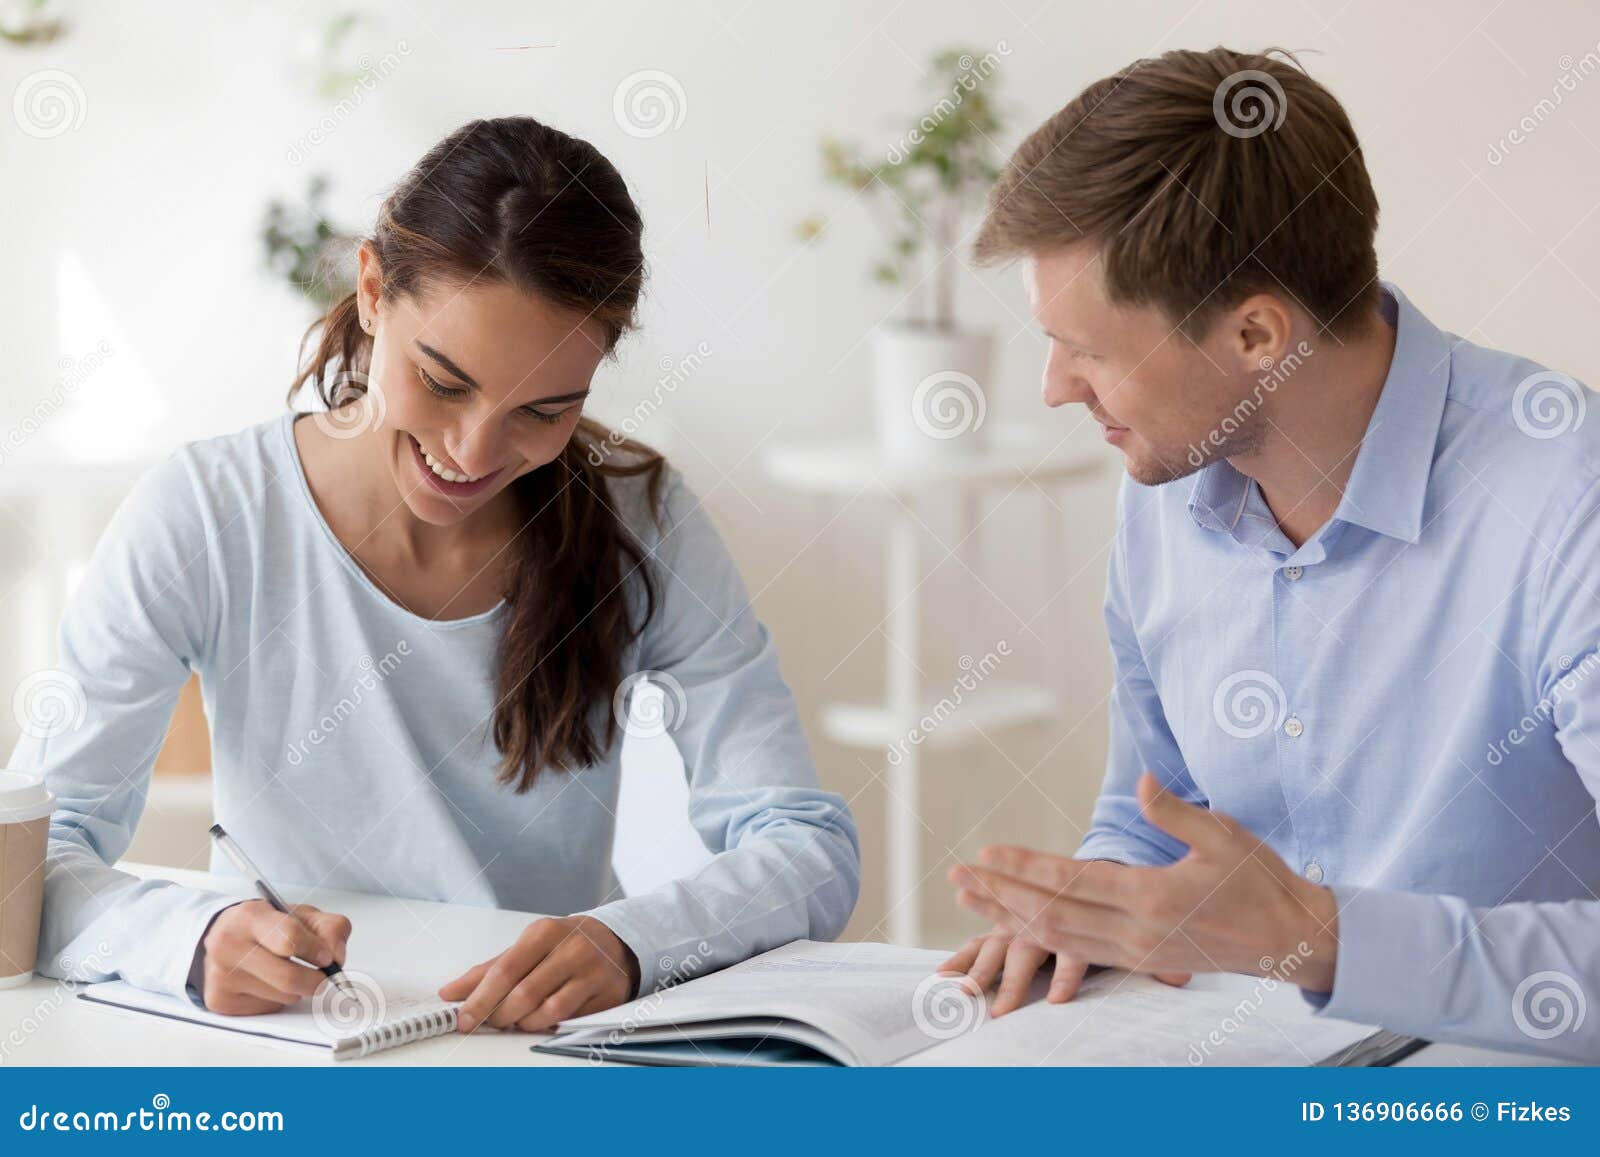 tutor helping female student making notes with research work